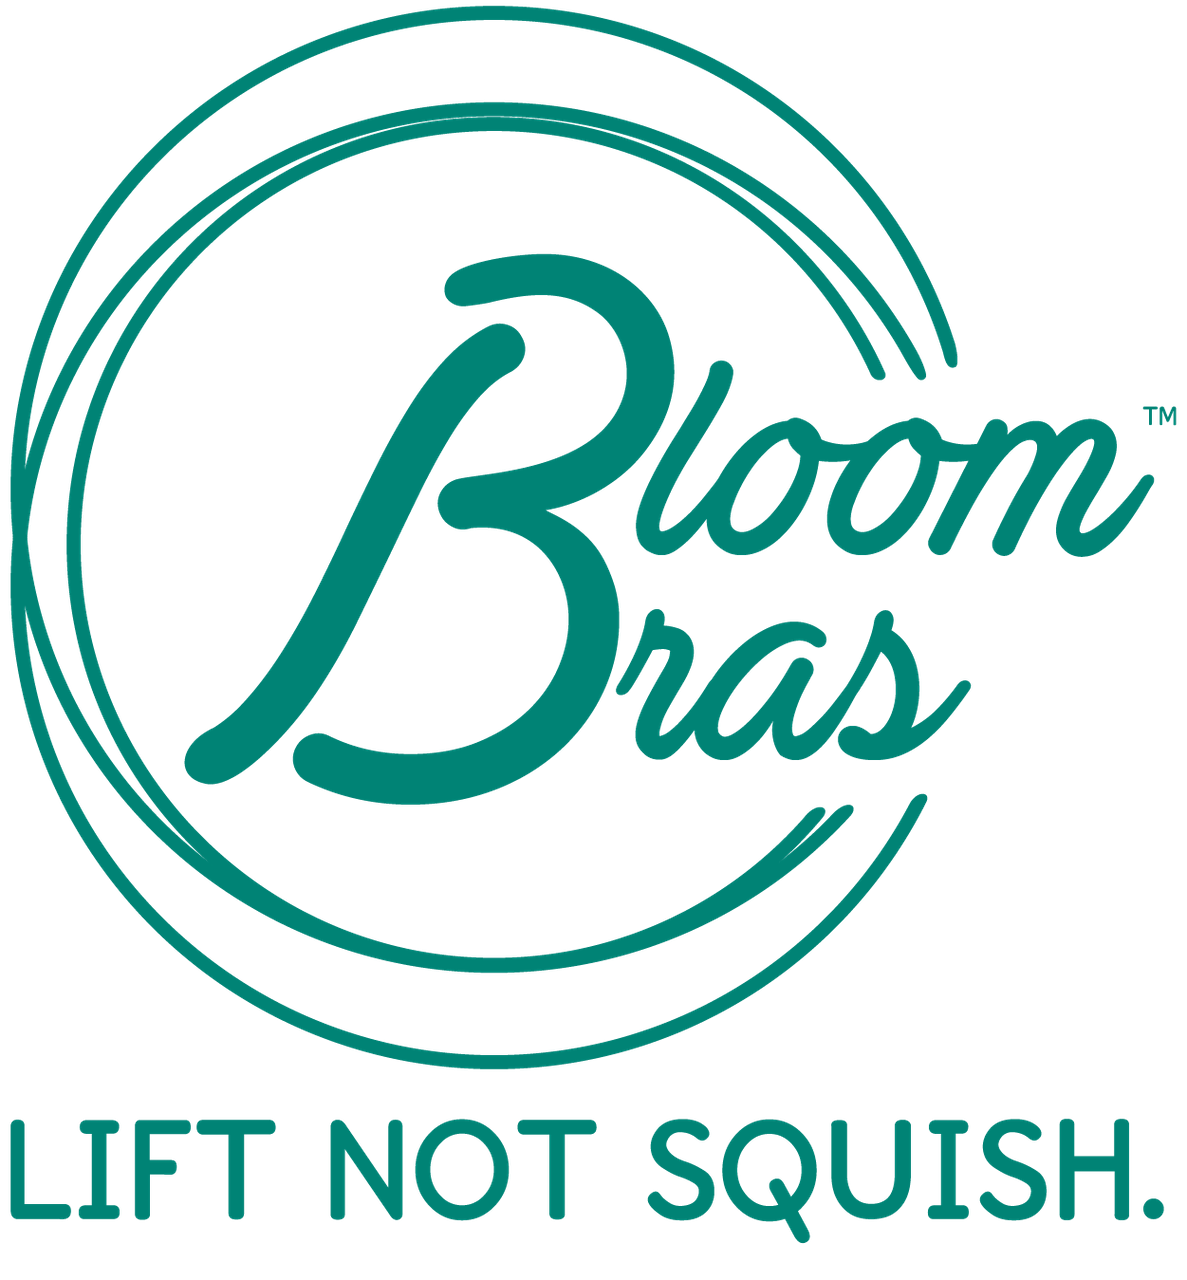 Products – Bloom Bras